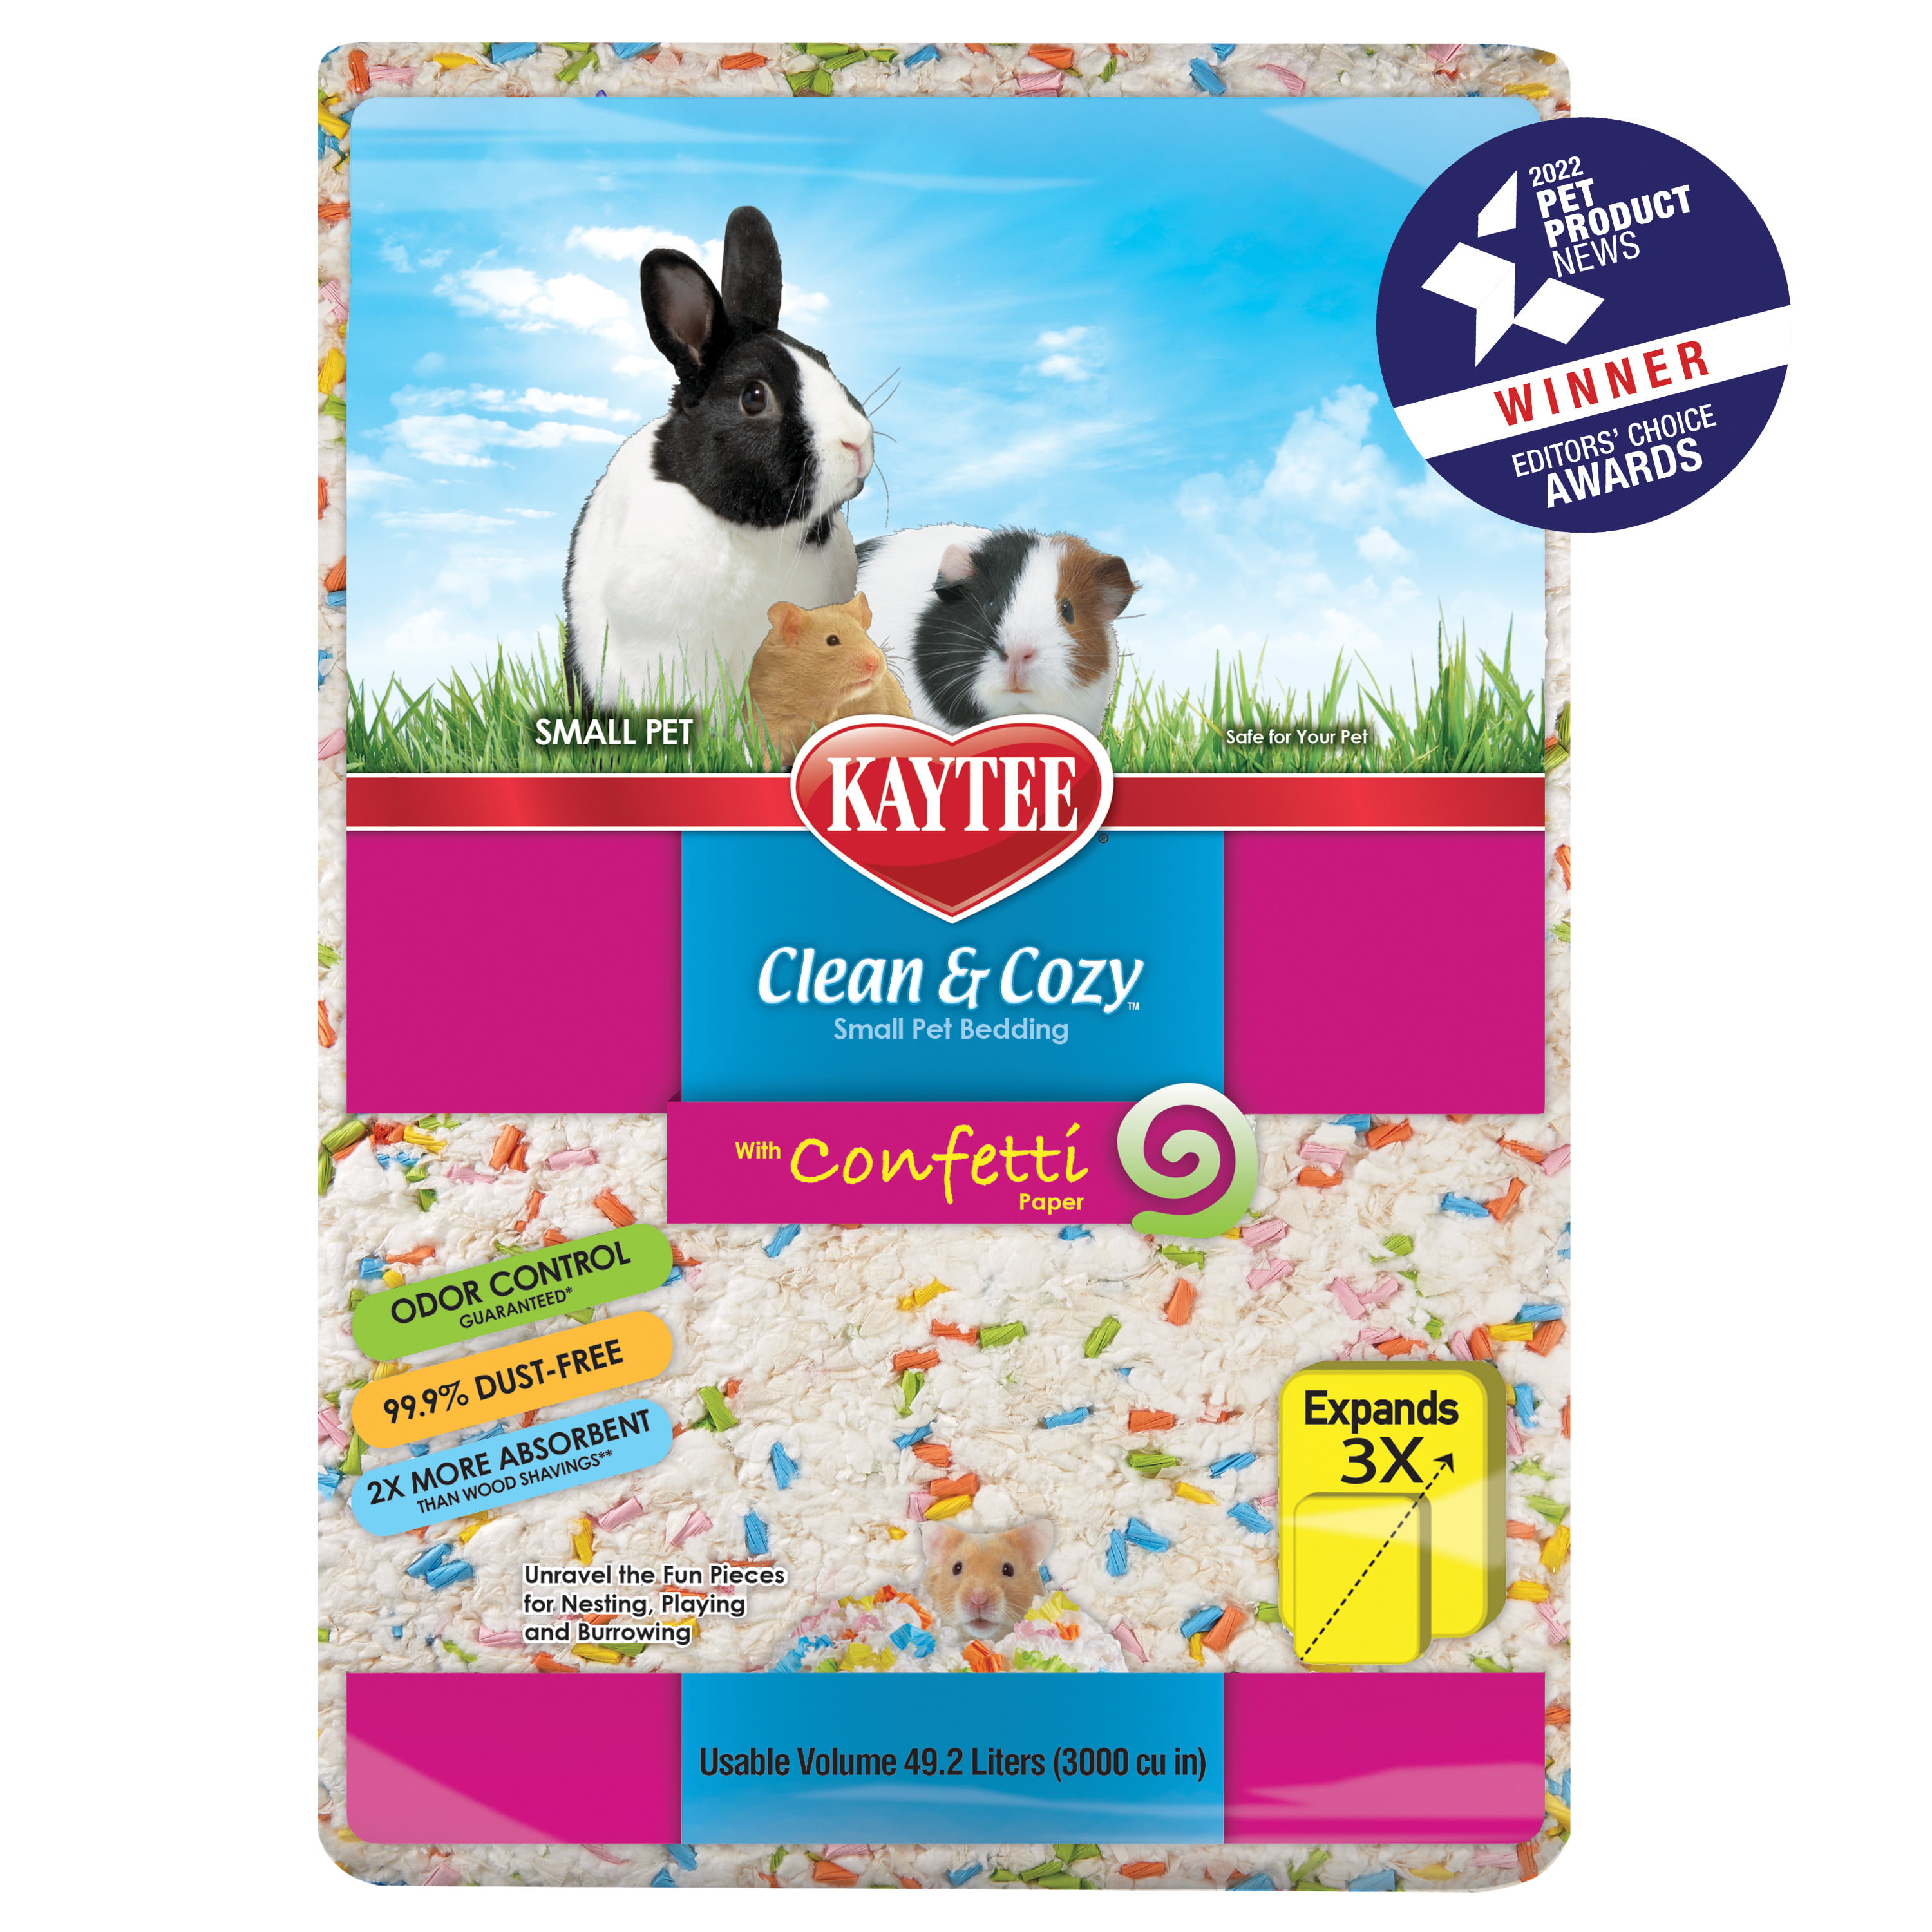 Kaytee Clean & Cozy Confetti Bedding For Pet Guinea Pigs, Rabbits, Hamsters  & More, 49.2L